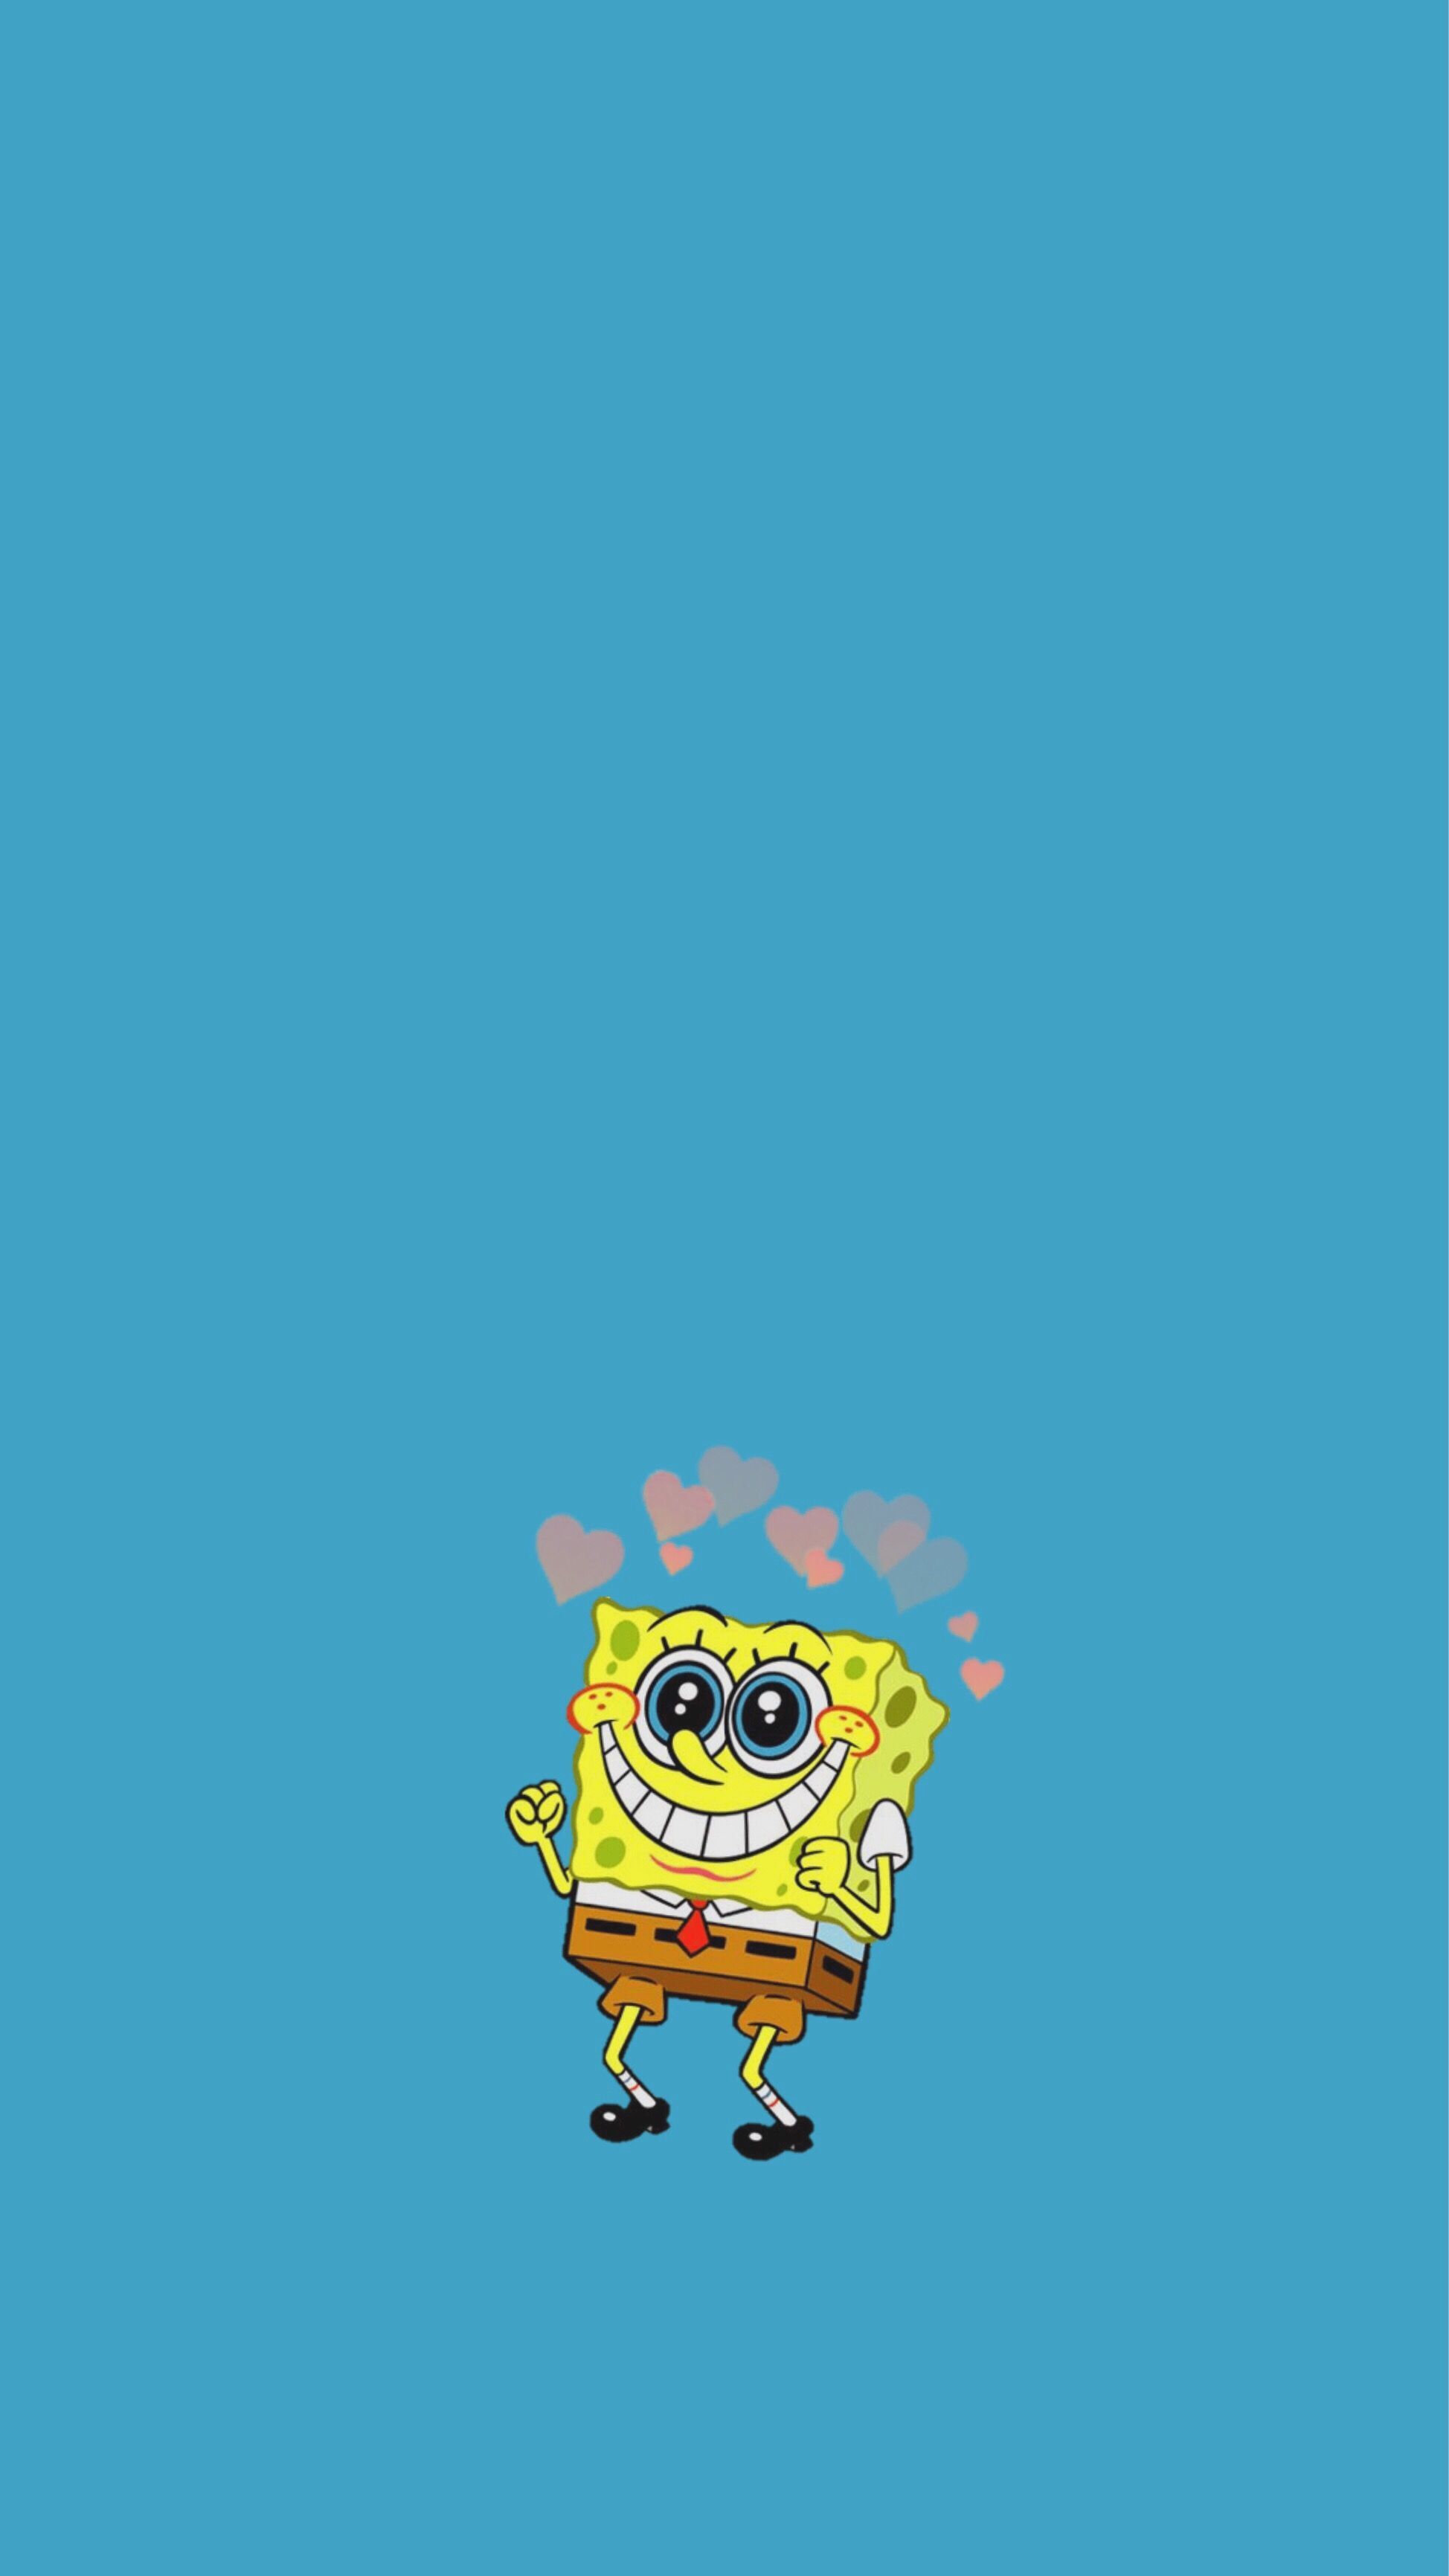 20 Outstanding Spongebob Wallpaper Aesthetic Computer You Can Save It Free Of Charge Aesthetic